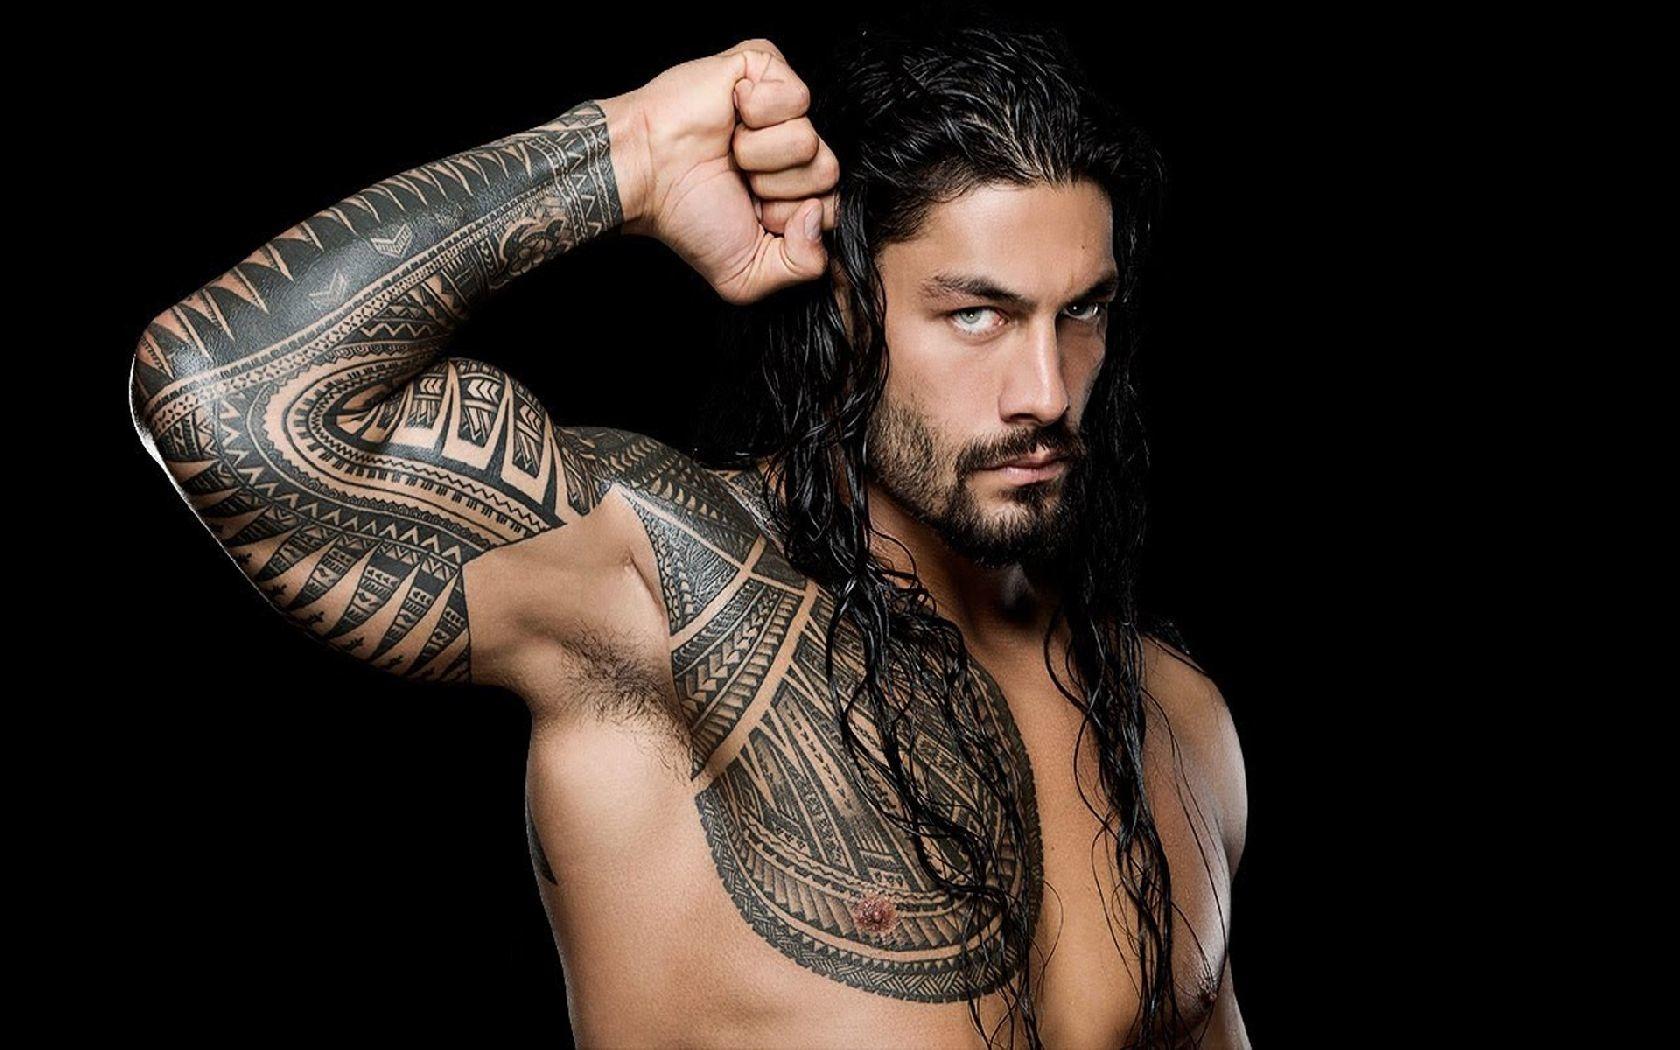 Roman Reigns tatoo iPhone 6s, 6 Plus and Pixel XL